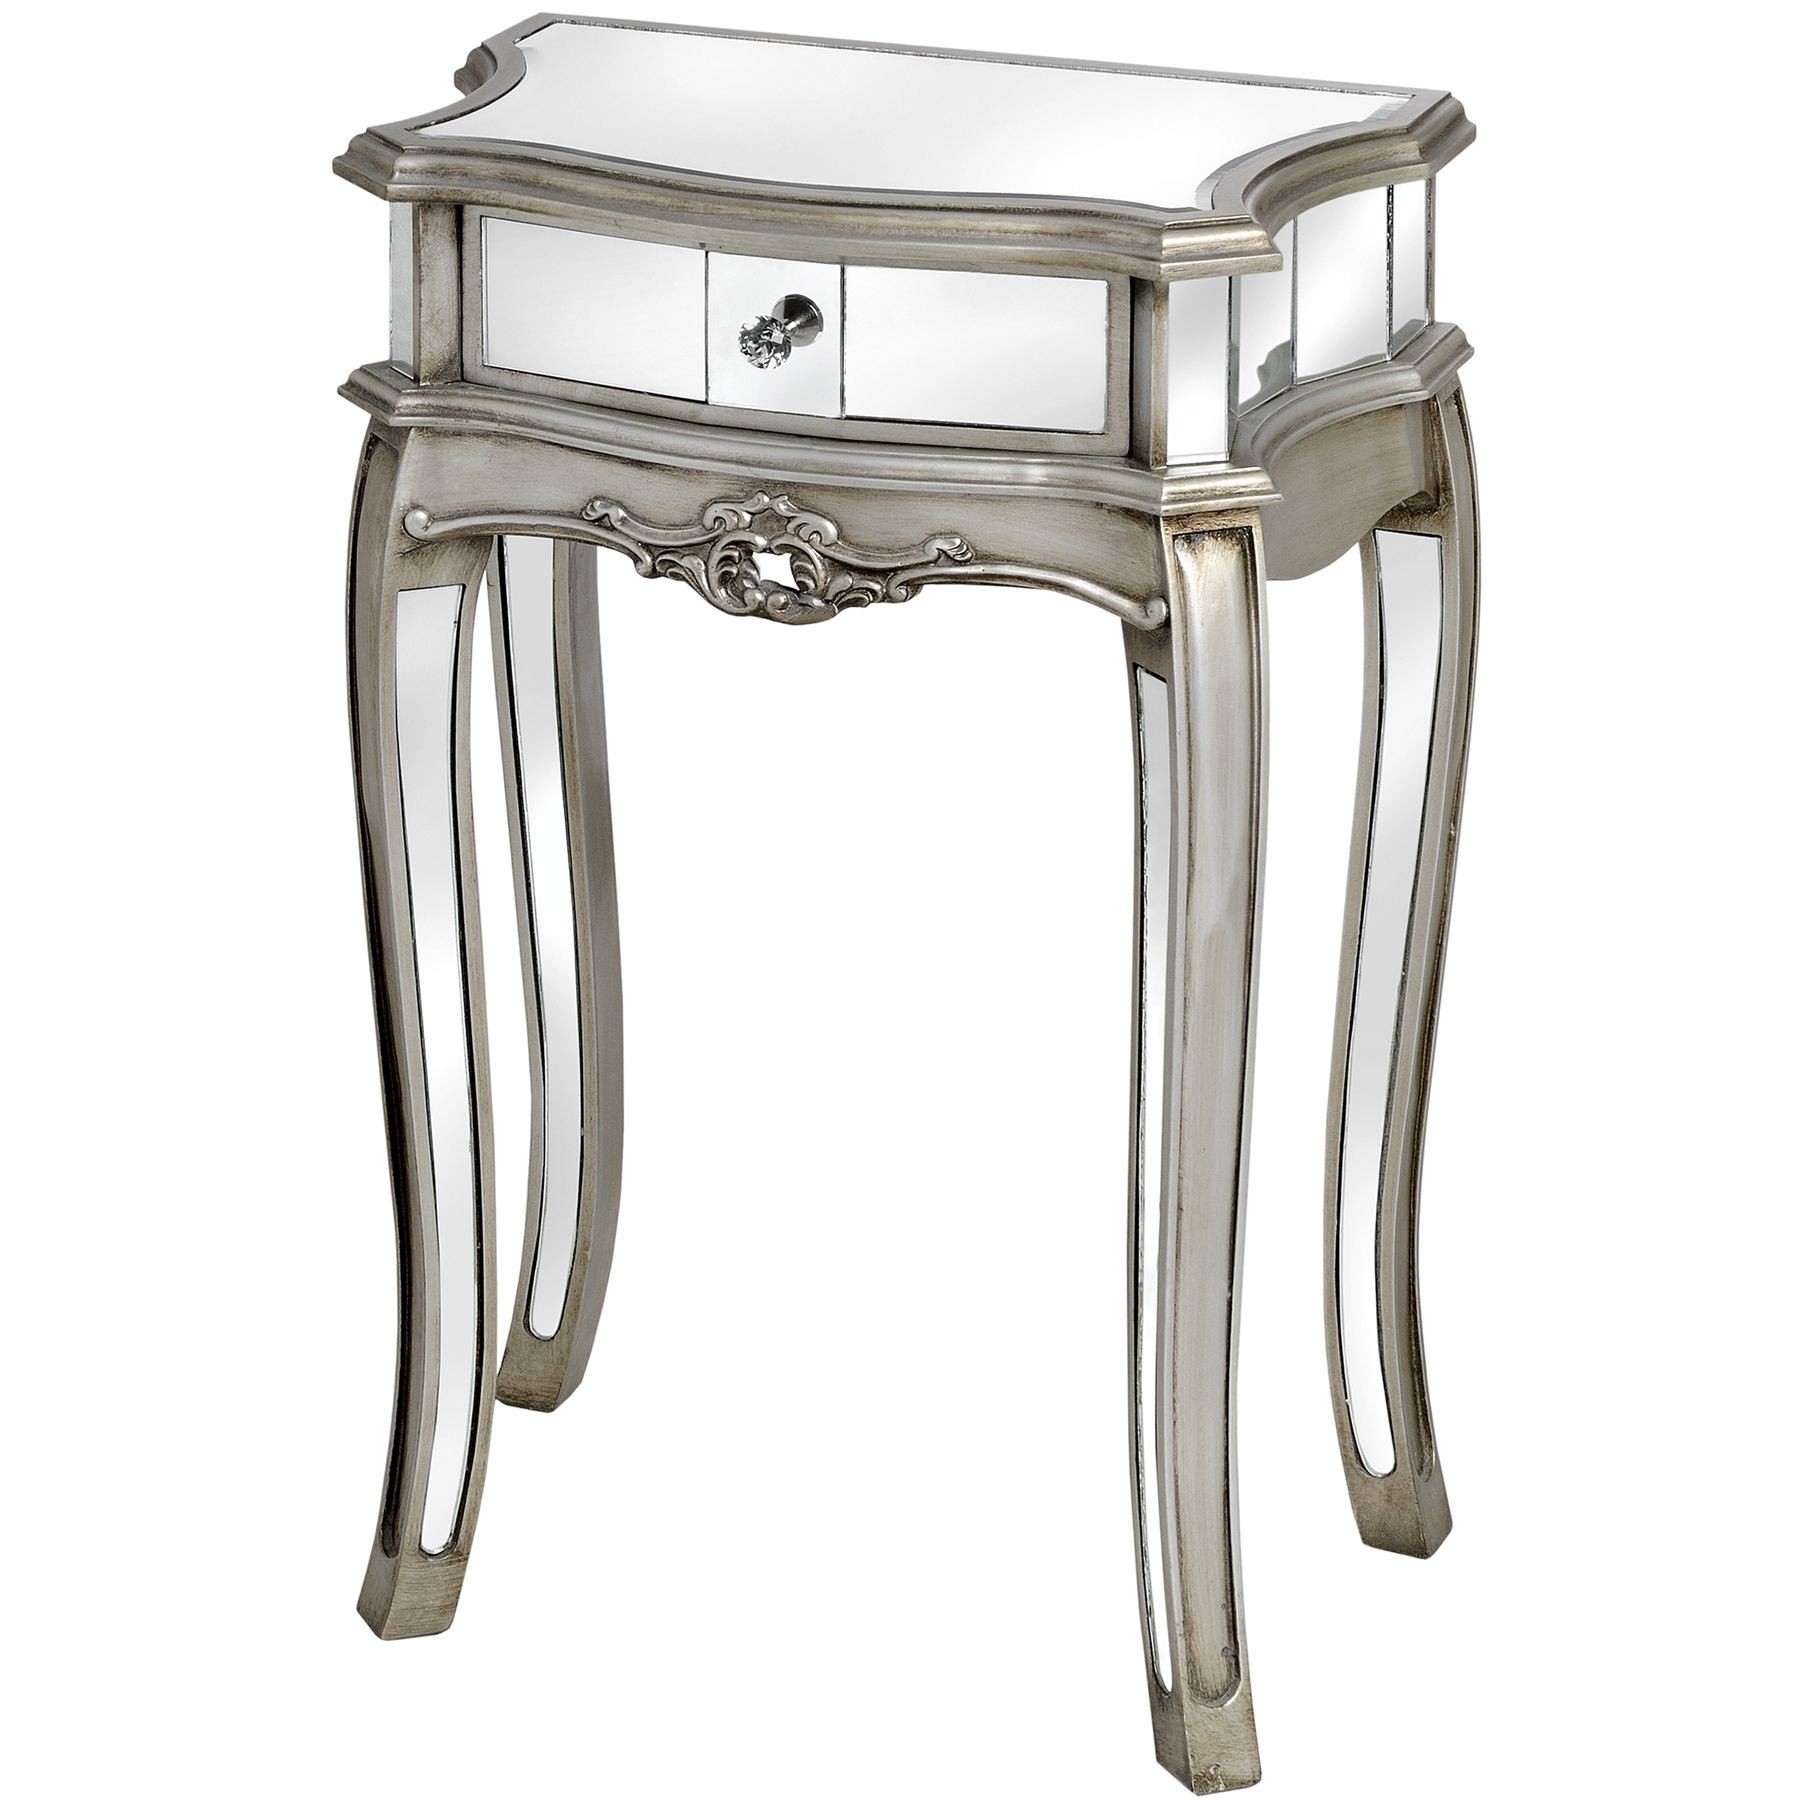 Antiqued silver mirrored bedside table